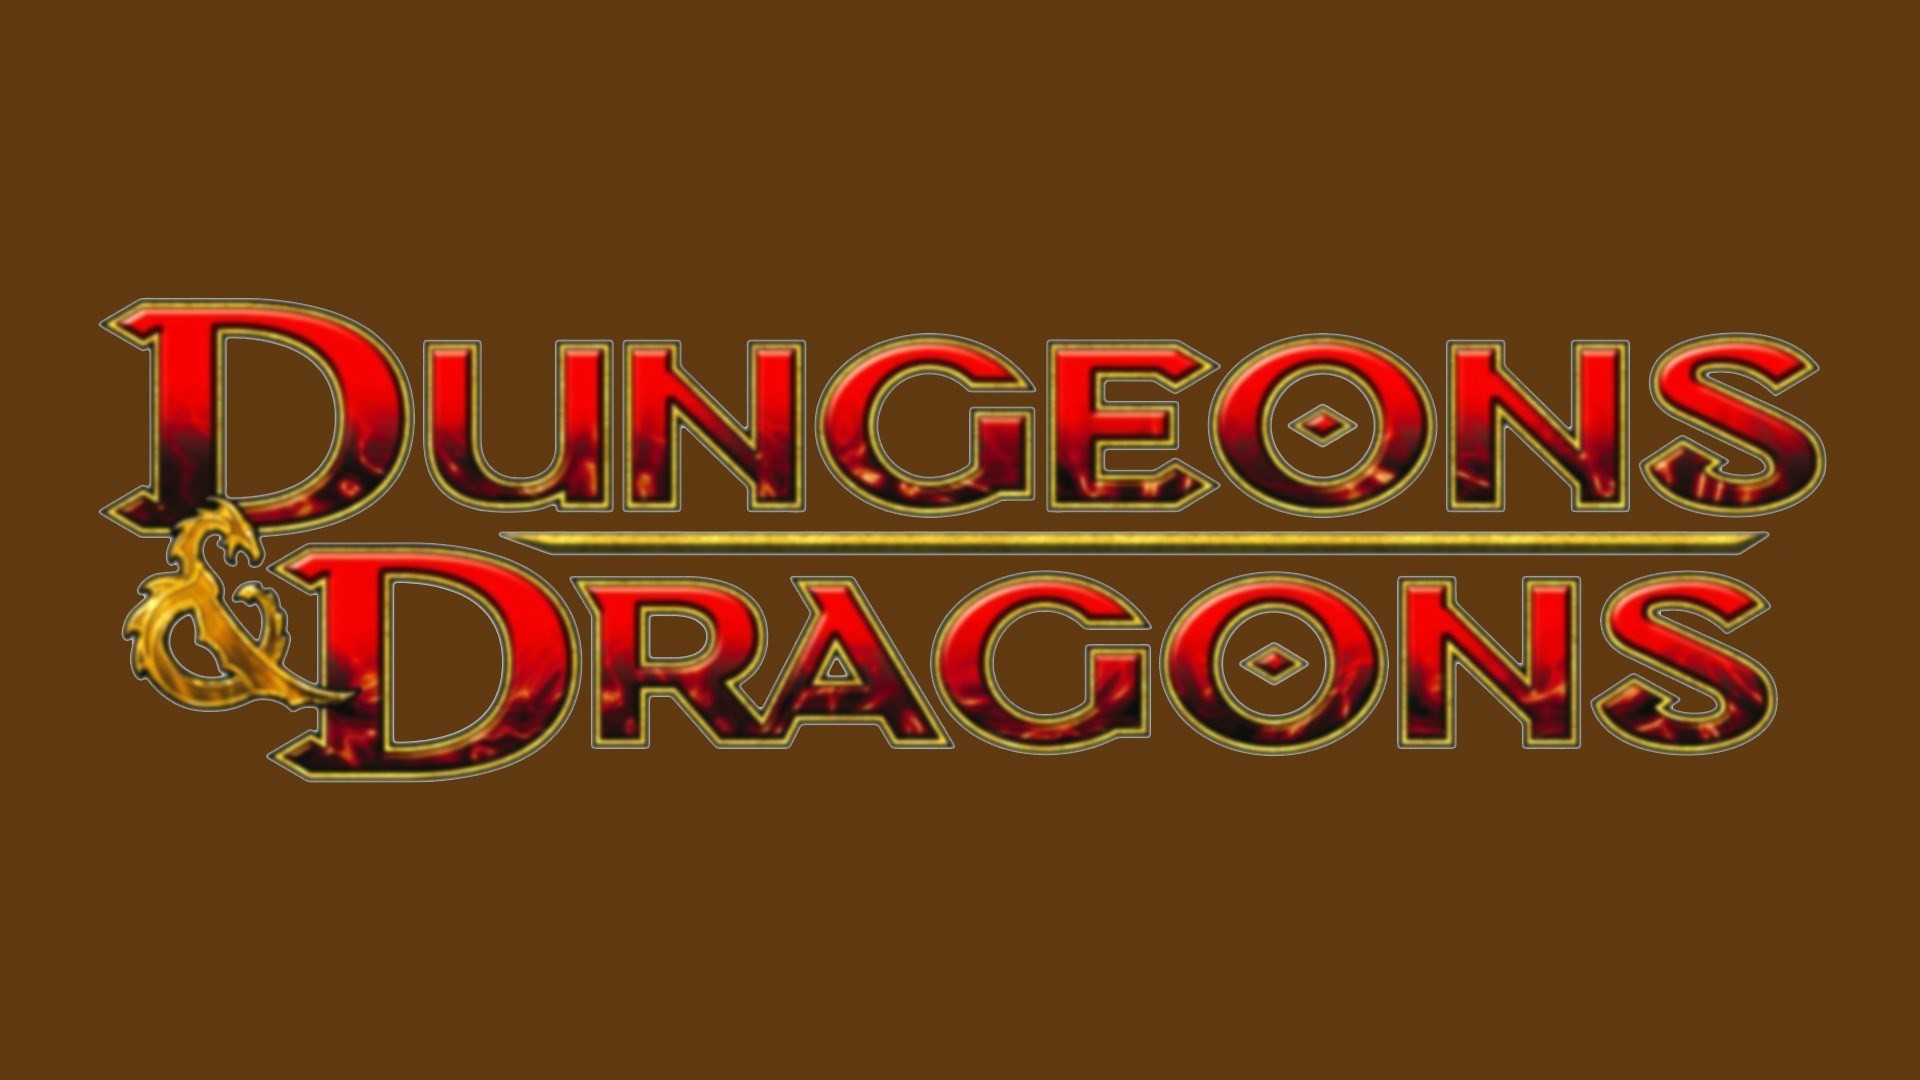 1920x1080  px Best dungeons and dragons pic by Deacon Young for :  pocketfullofgrace.com